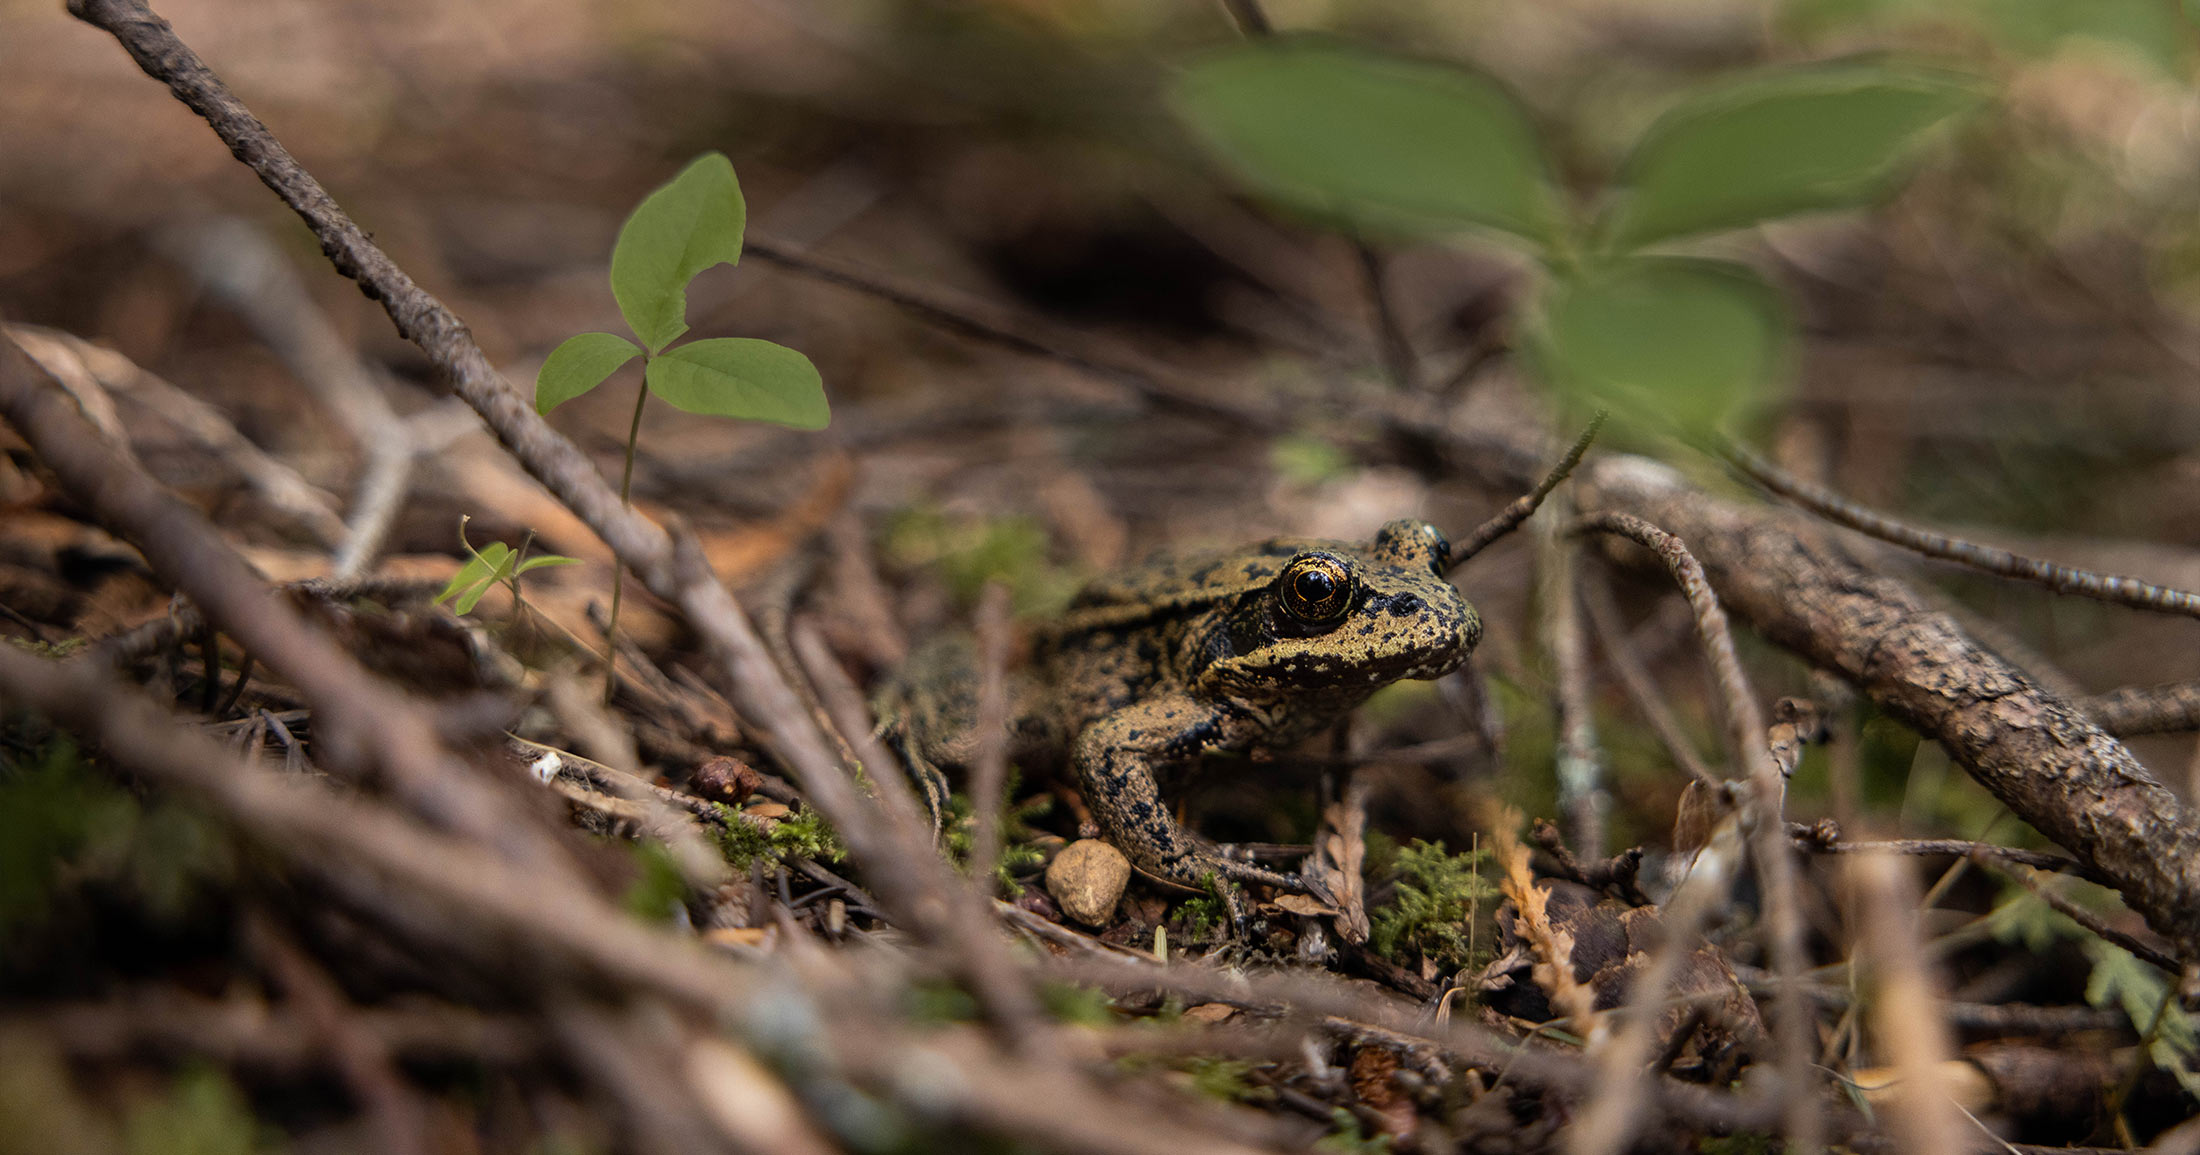 Red legged frog on the forest floor.